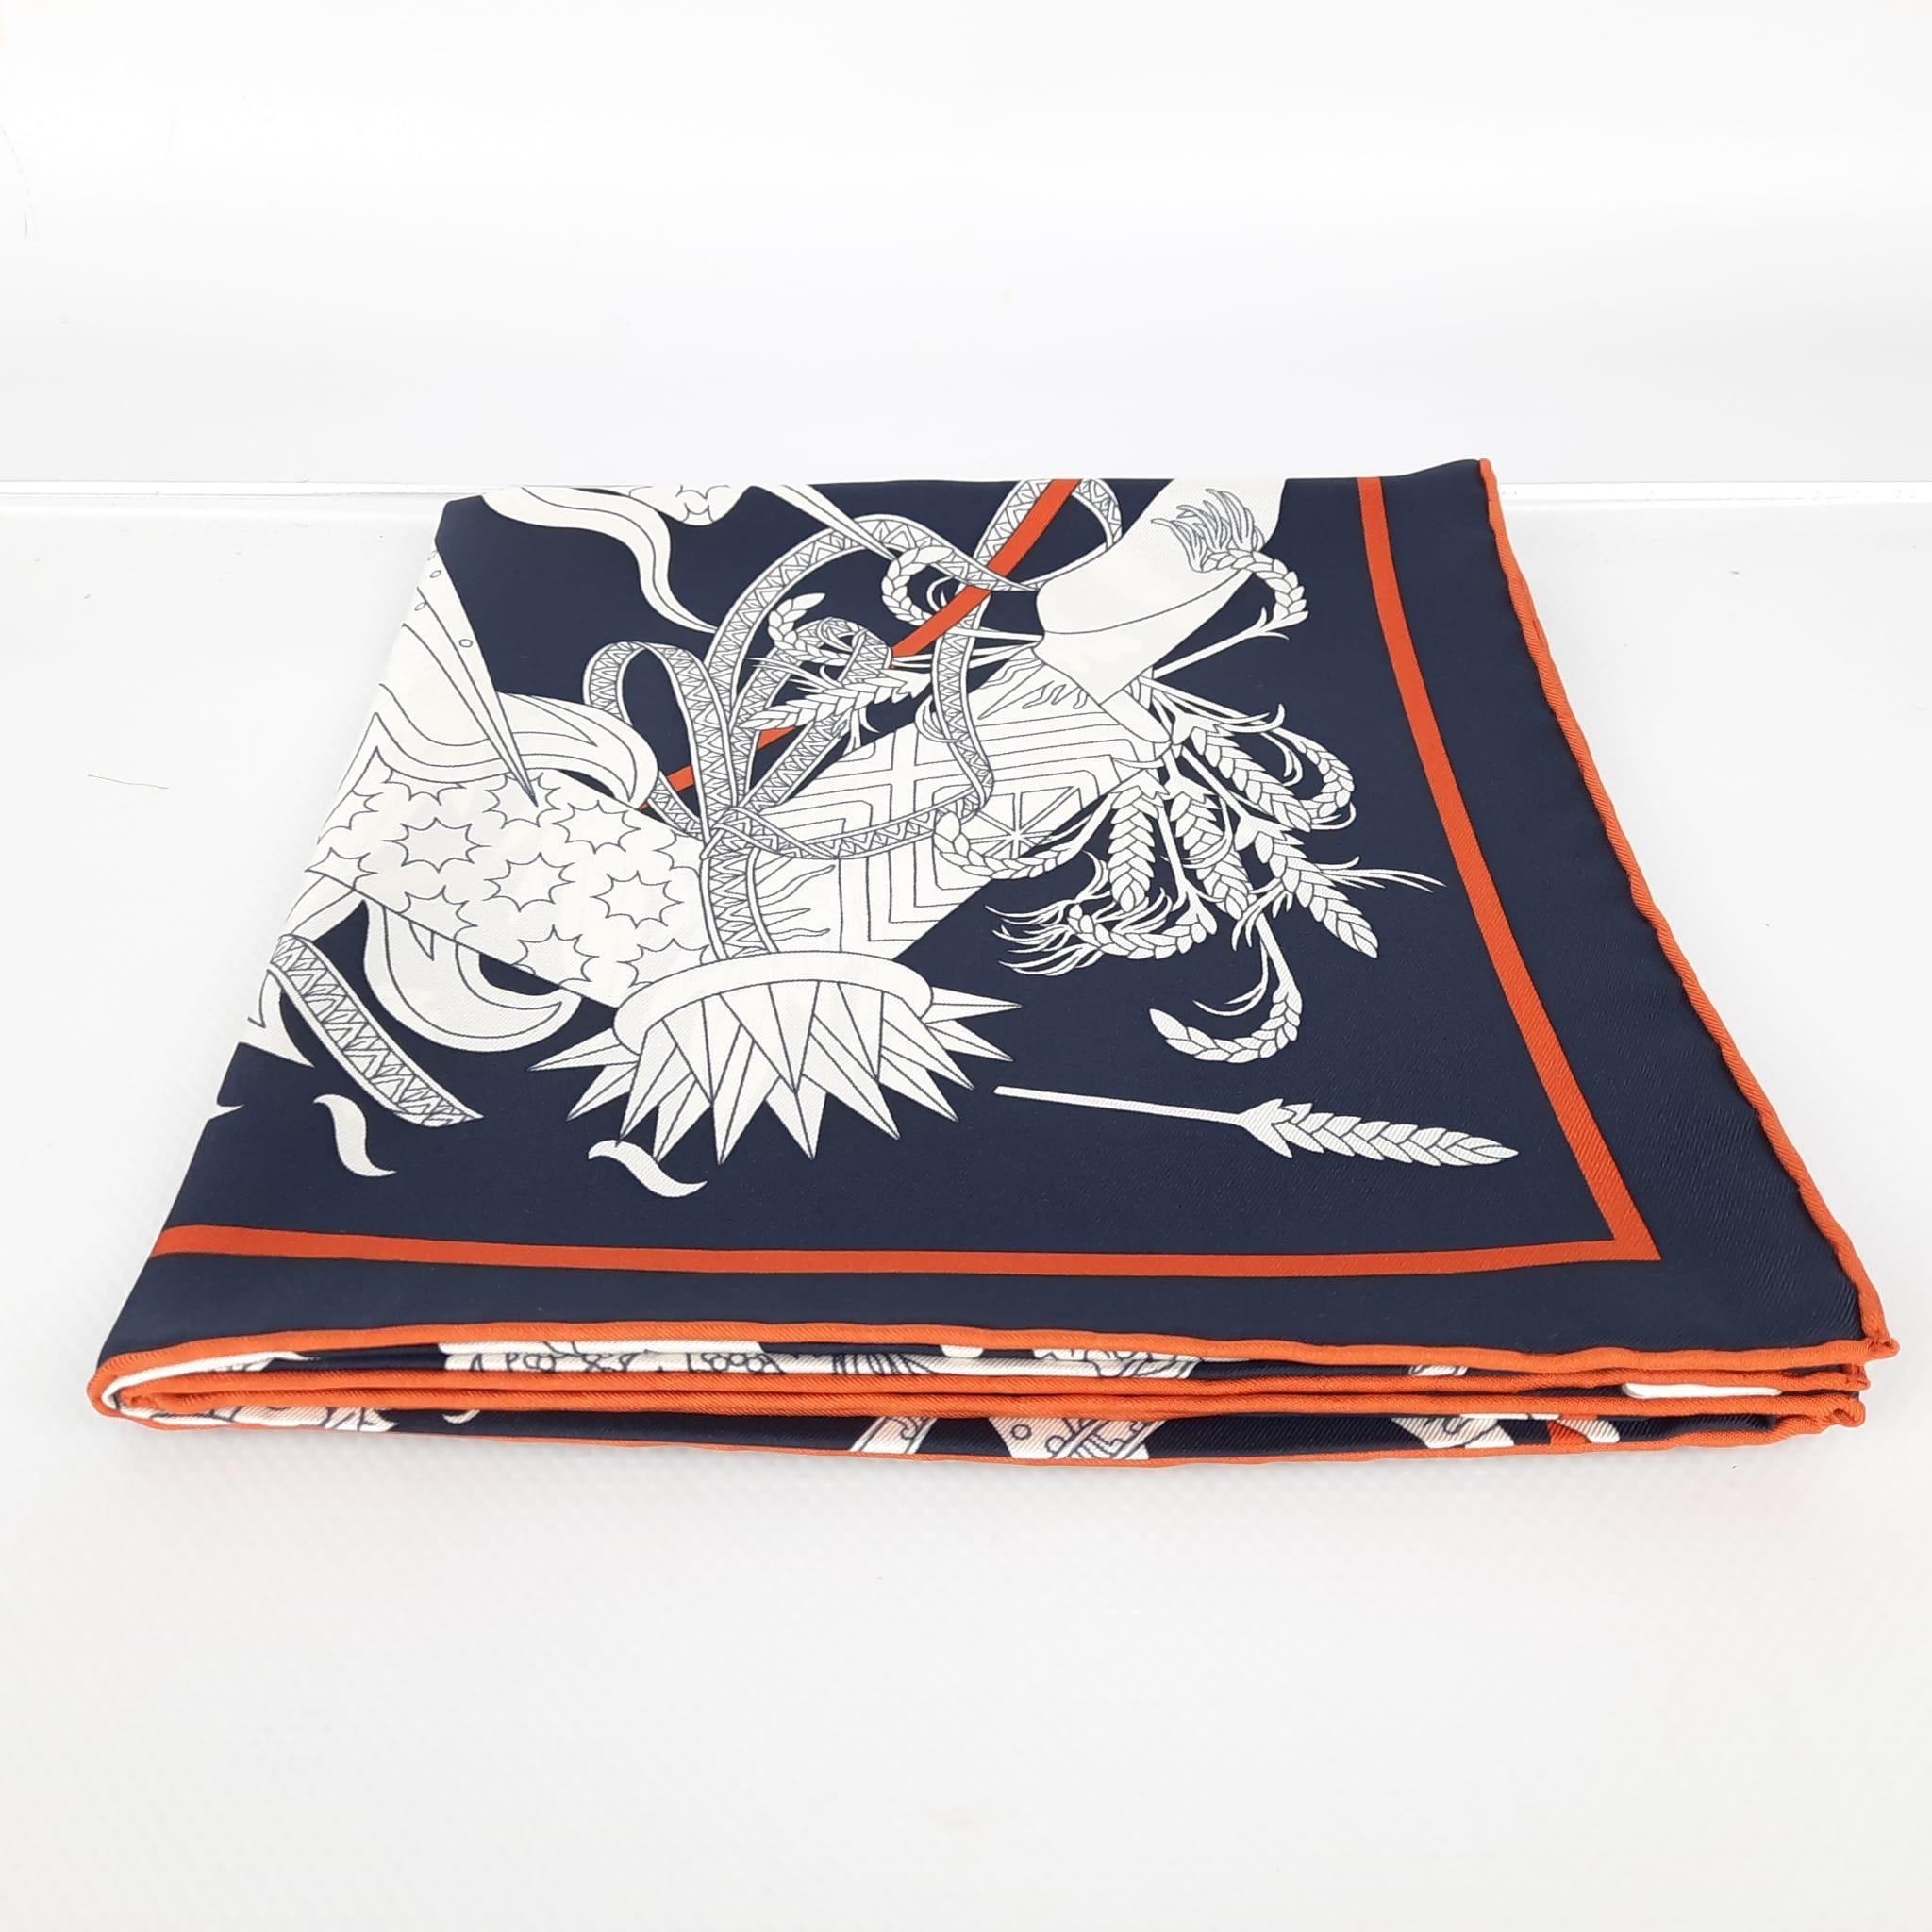 Scarf in silk twill with hand-rolled edges (100% silk).
Designed by Pierre Marie